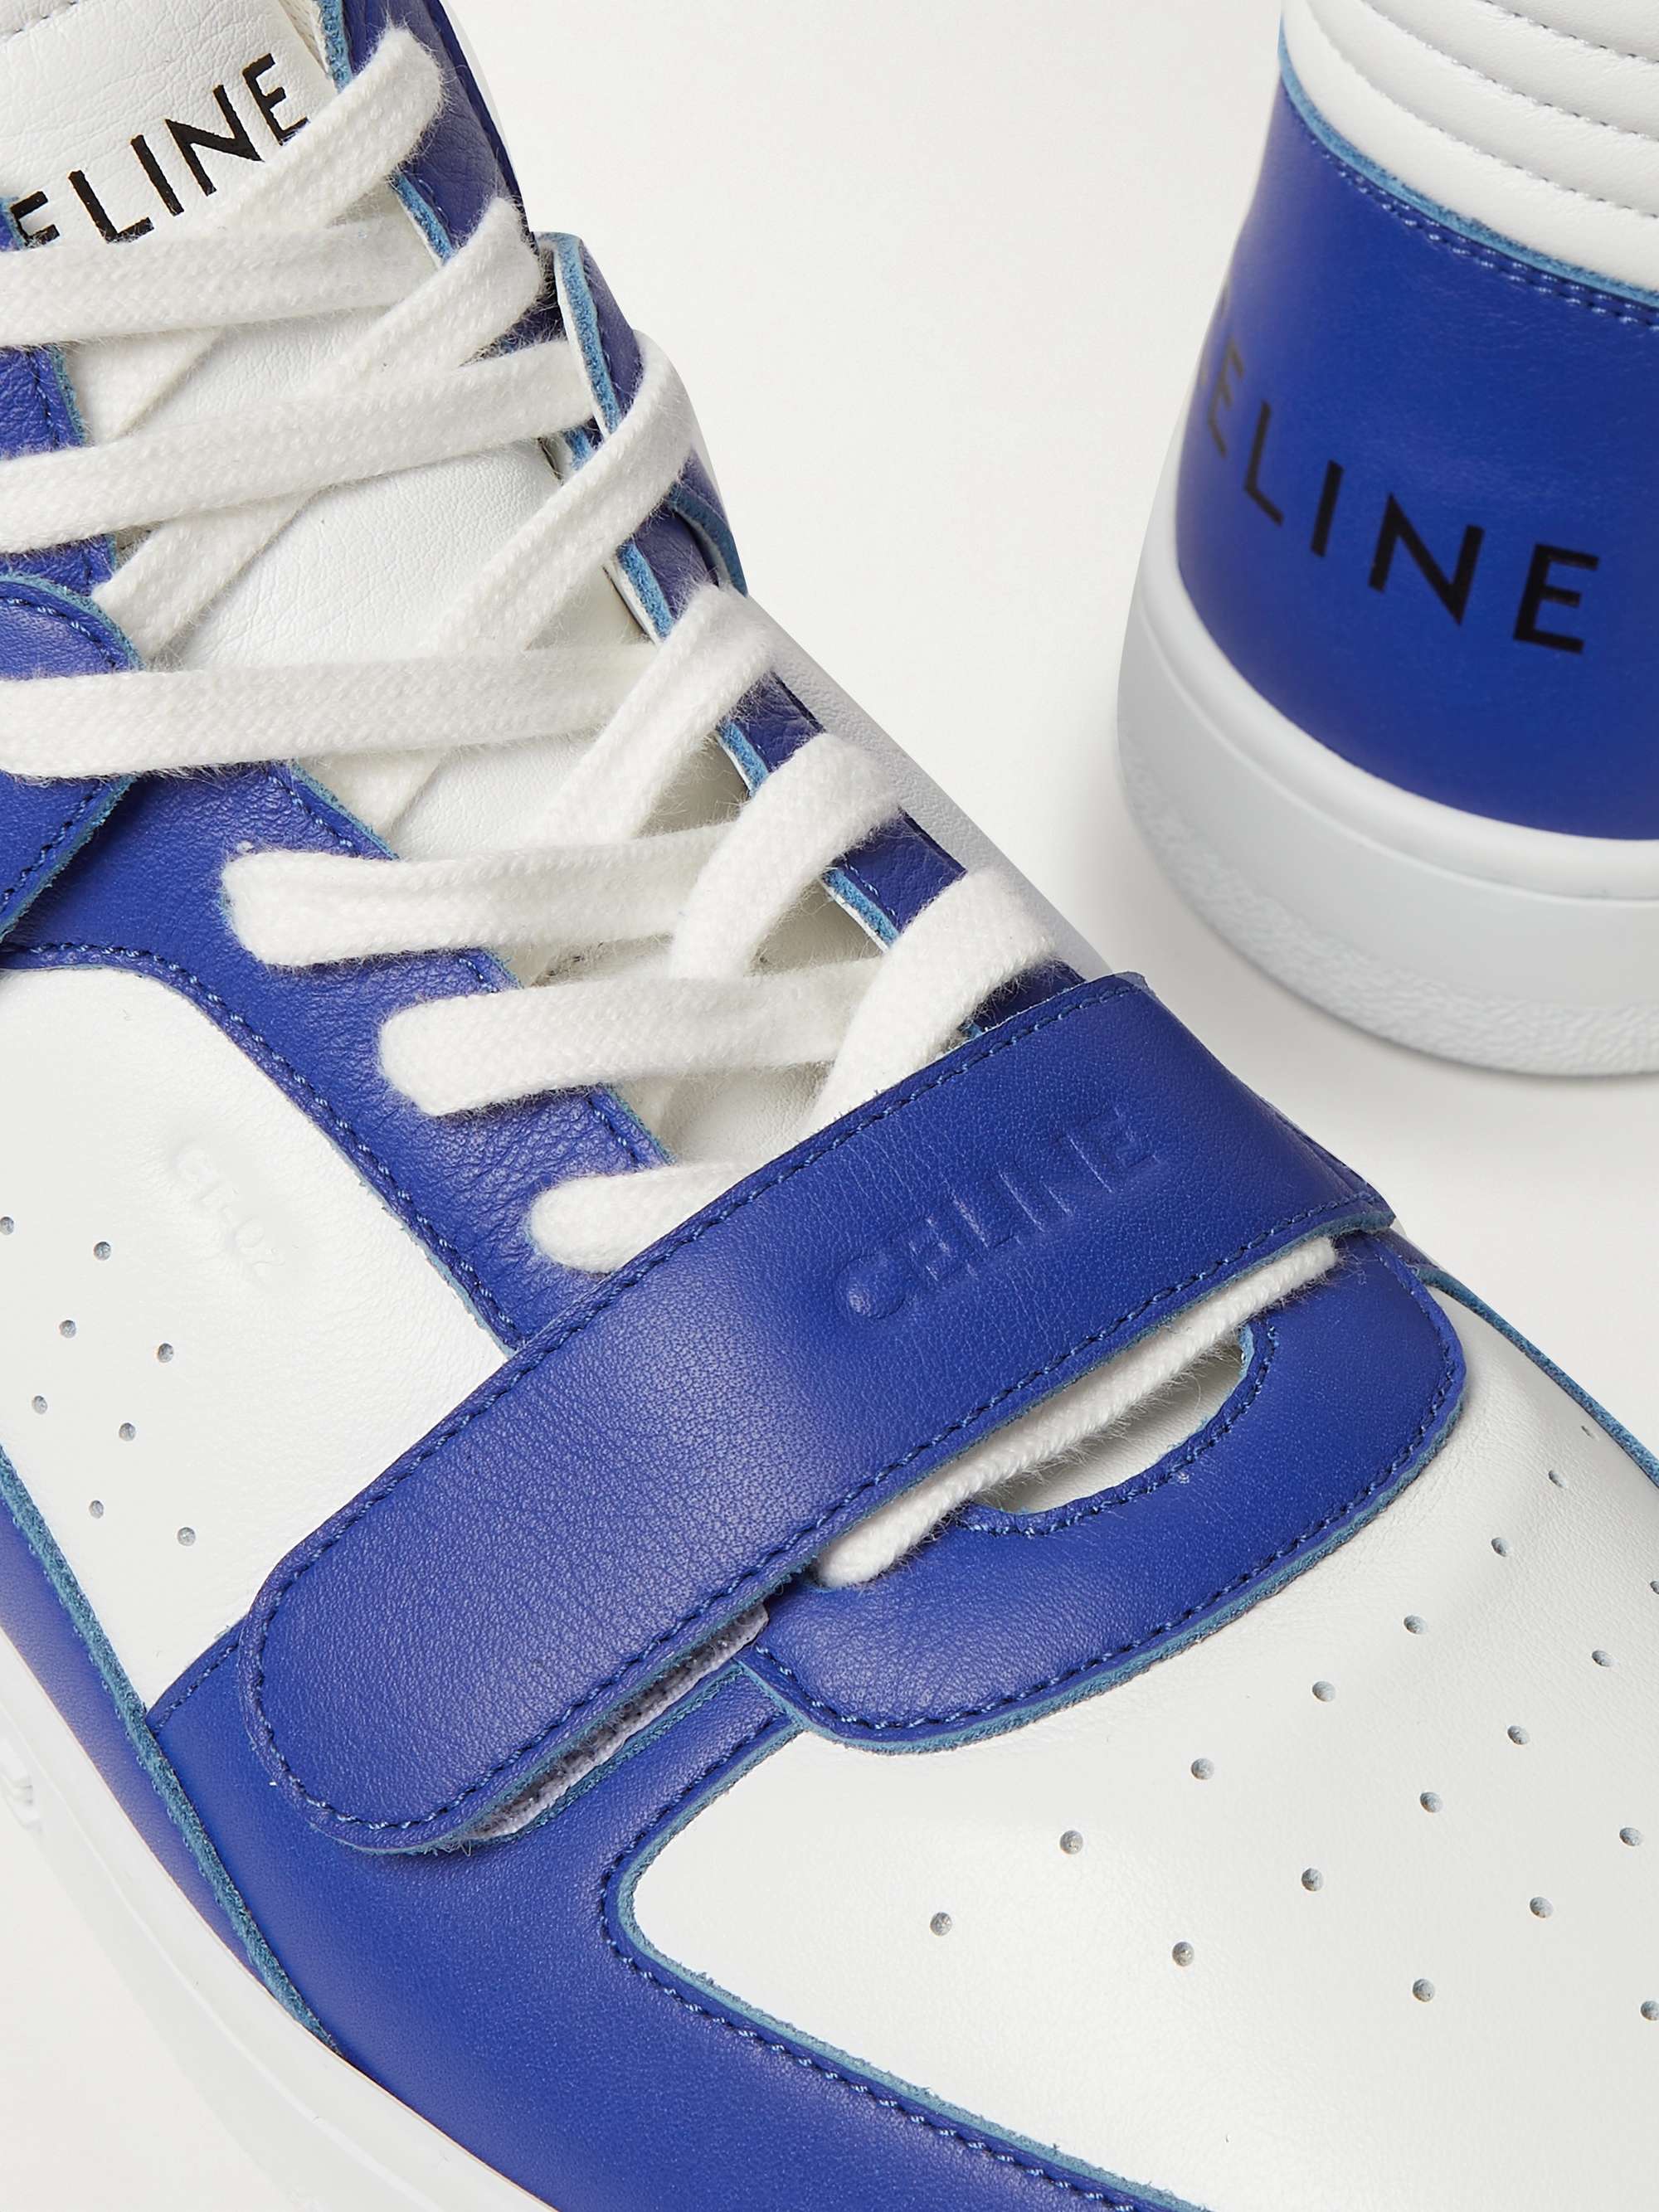 CELINE HOMME CT-02 Colour-Block Leather High-Top Sneakers